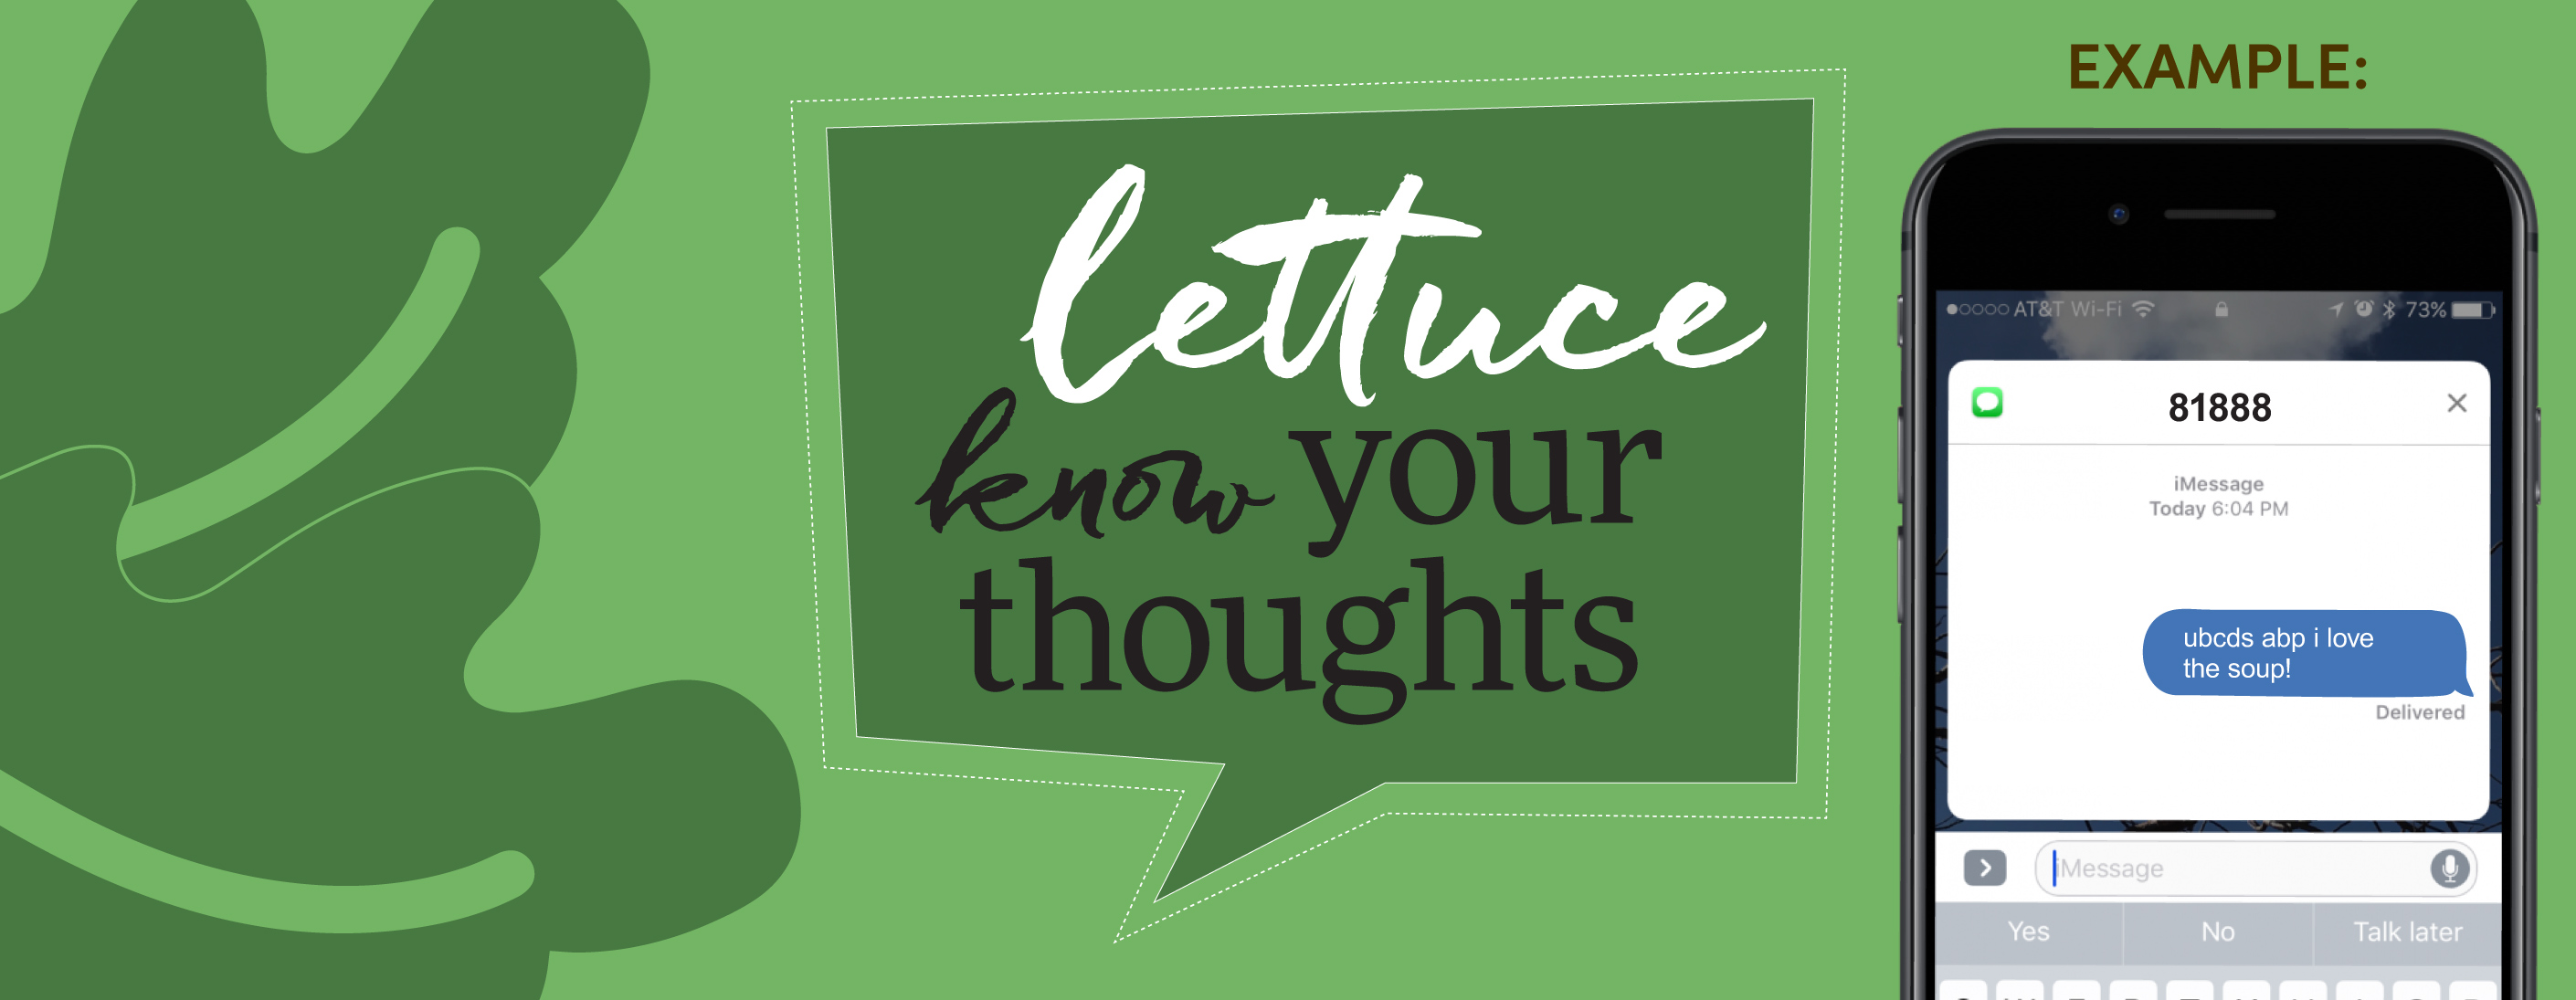 Lettuce know your thoughts. Example: Text to 81888: ubcds abp i love the soup!